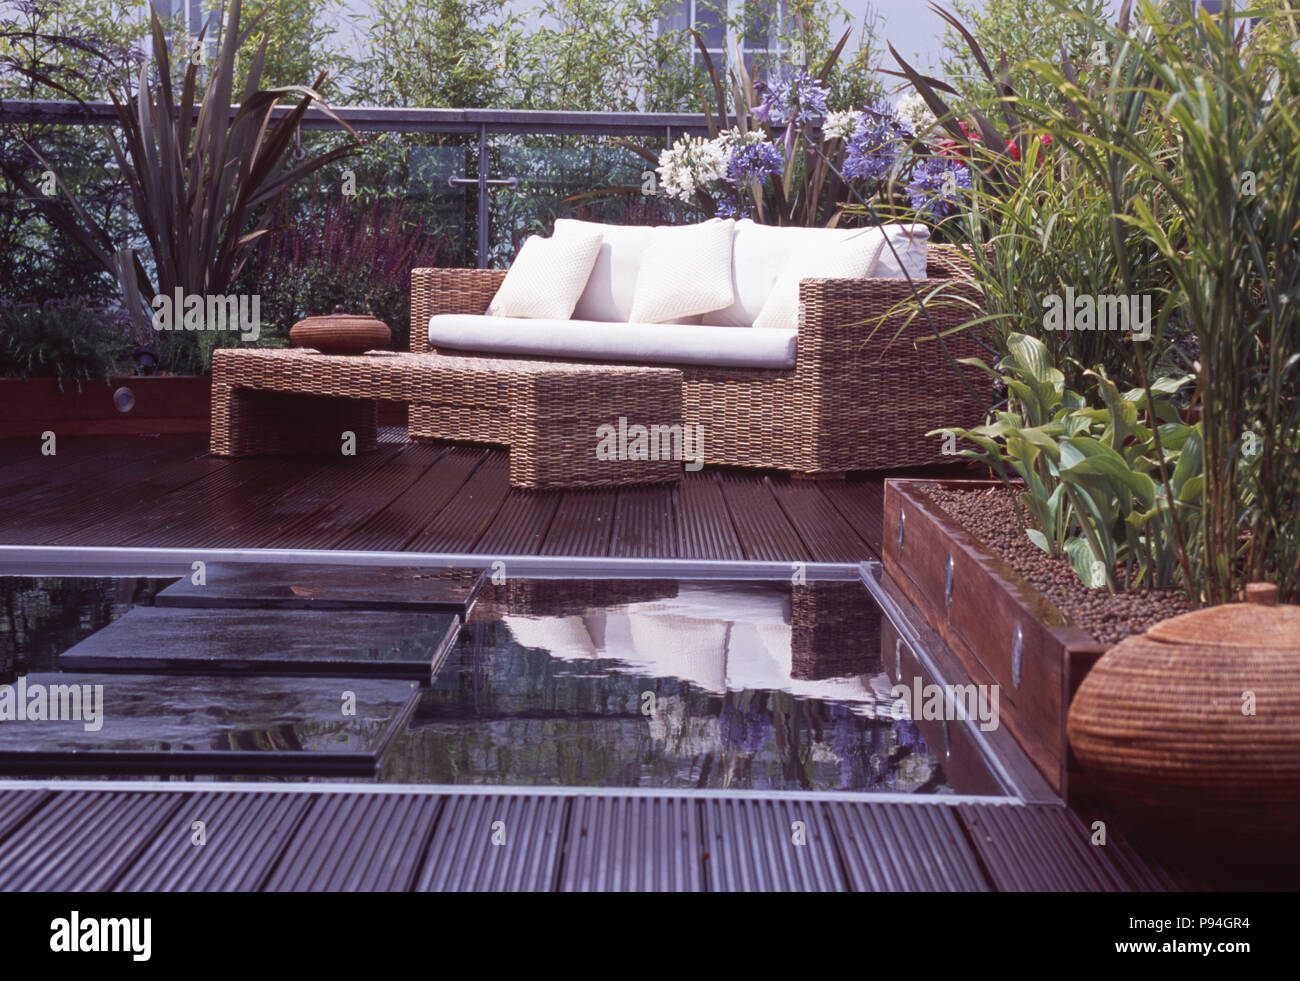 Lushly planted roof garden with seagrass table and sofa with white cushions on decking beside pool with stone paving Stock Photo